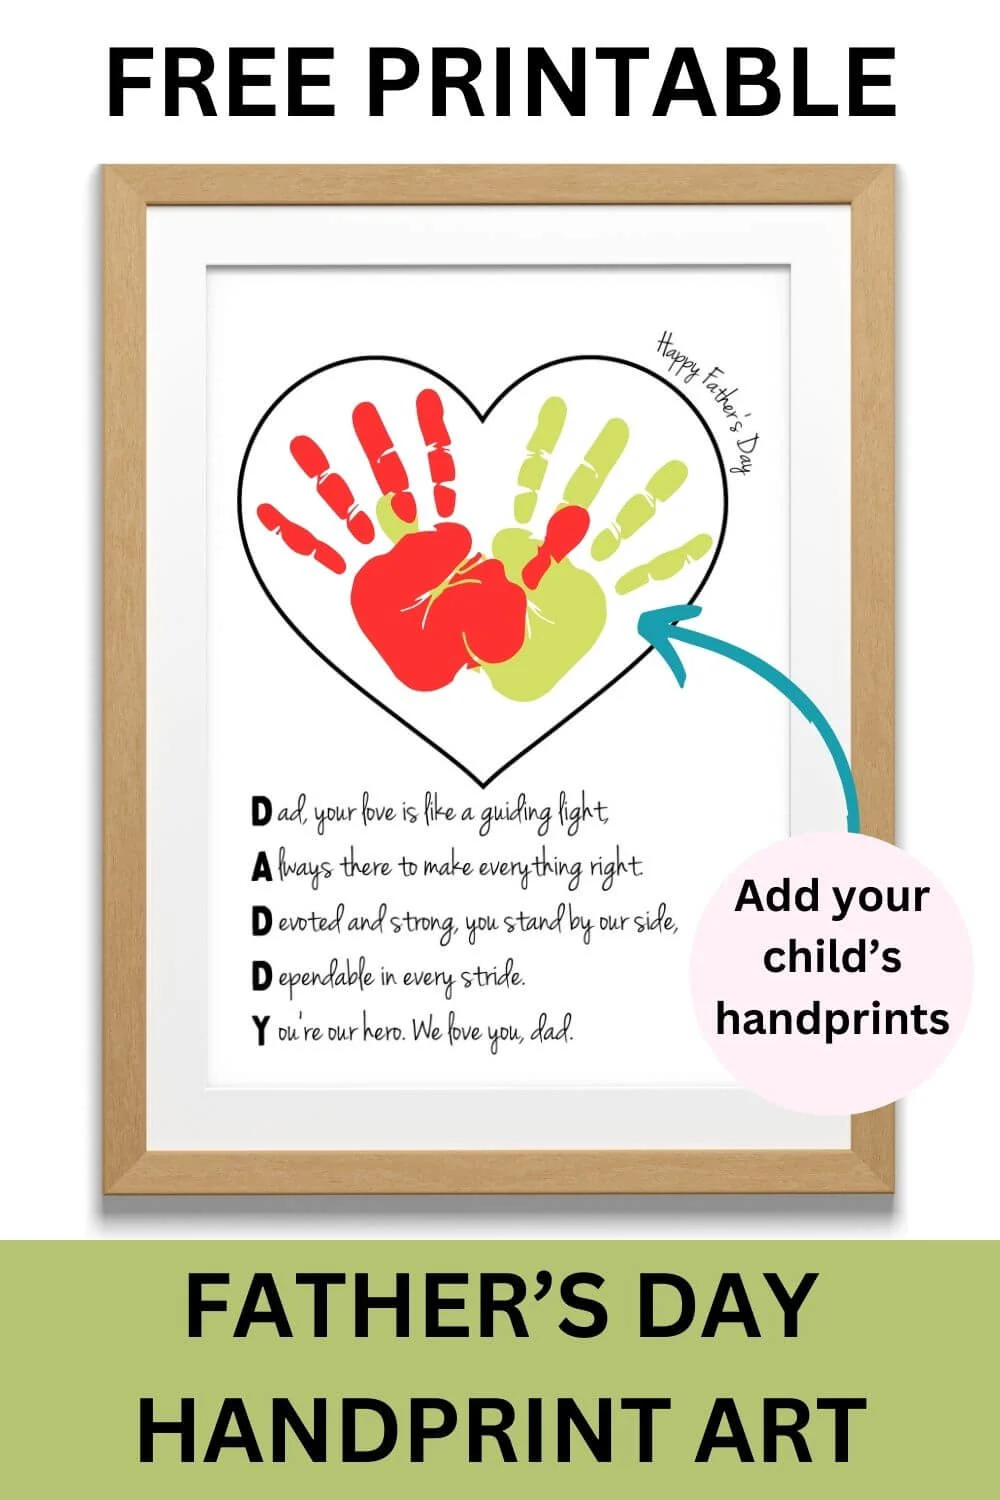 free printable father's day handprint art template in wooden frame.